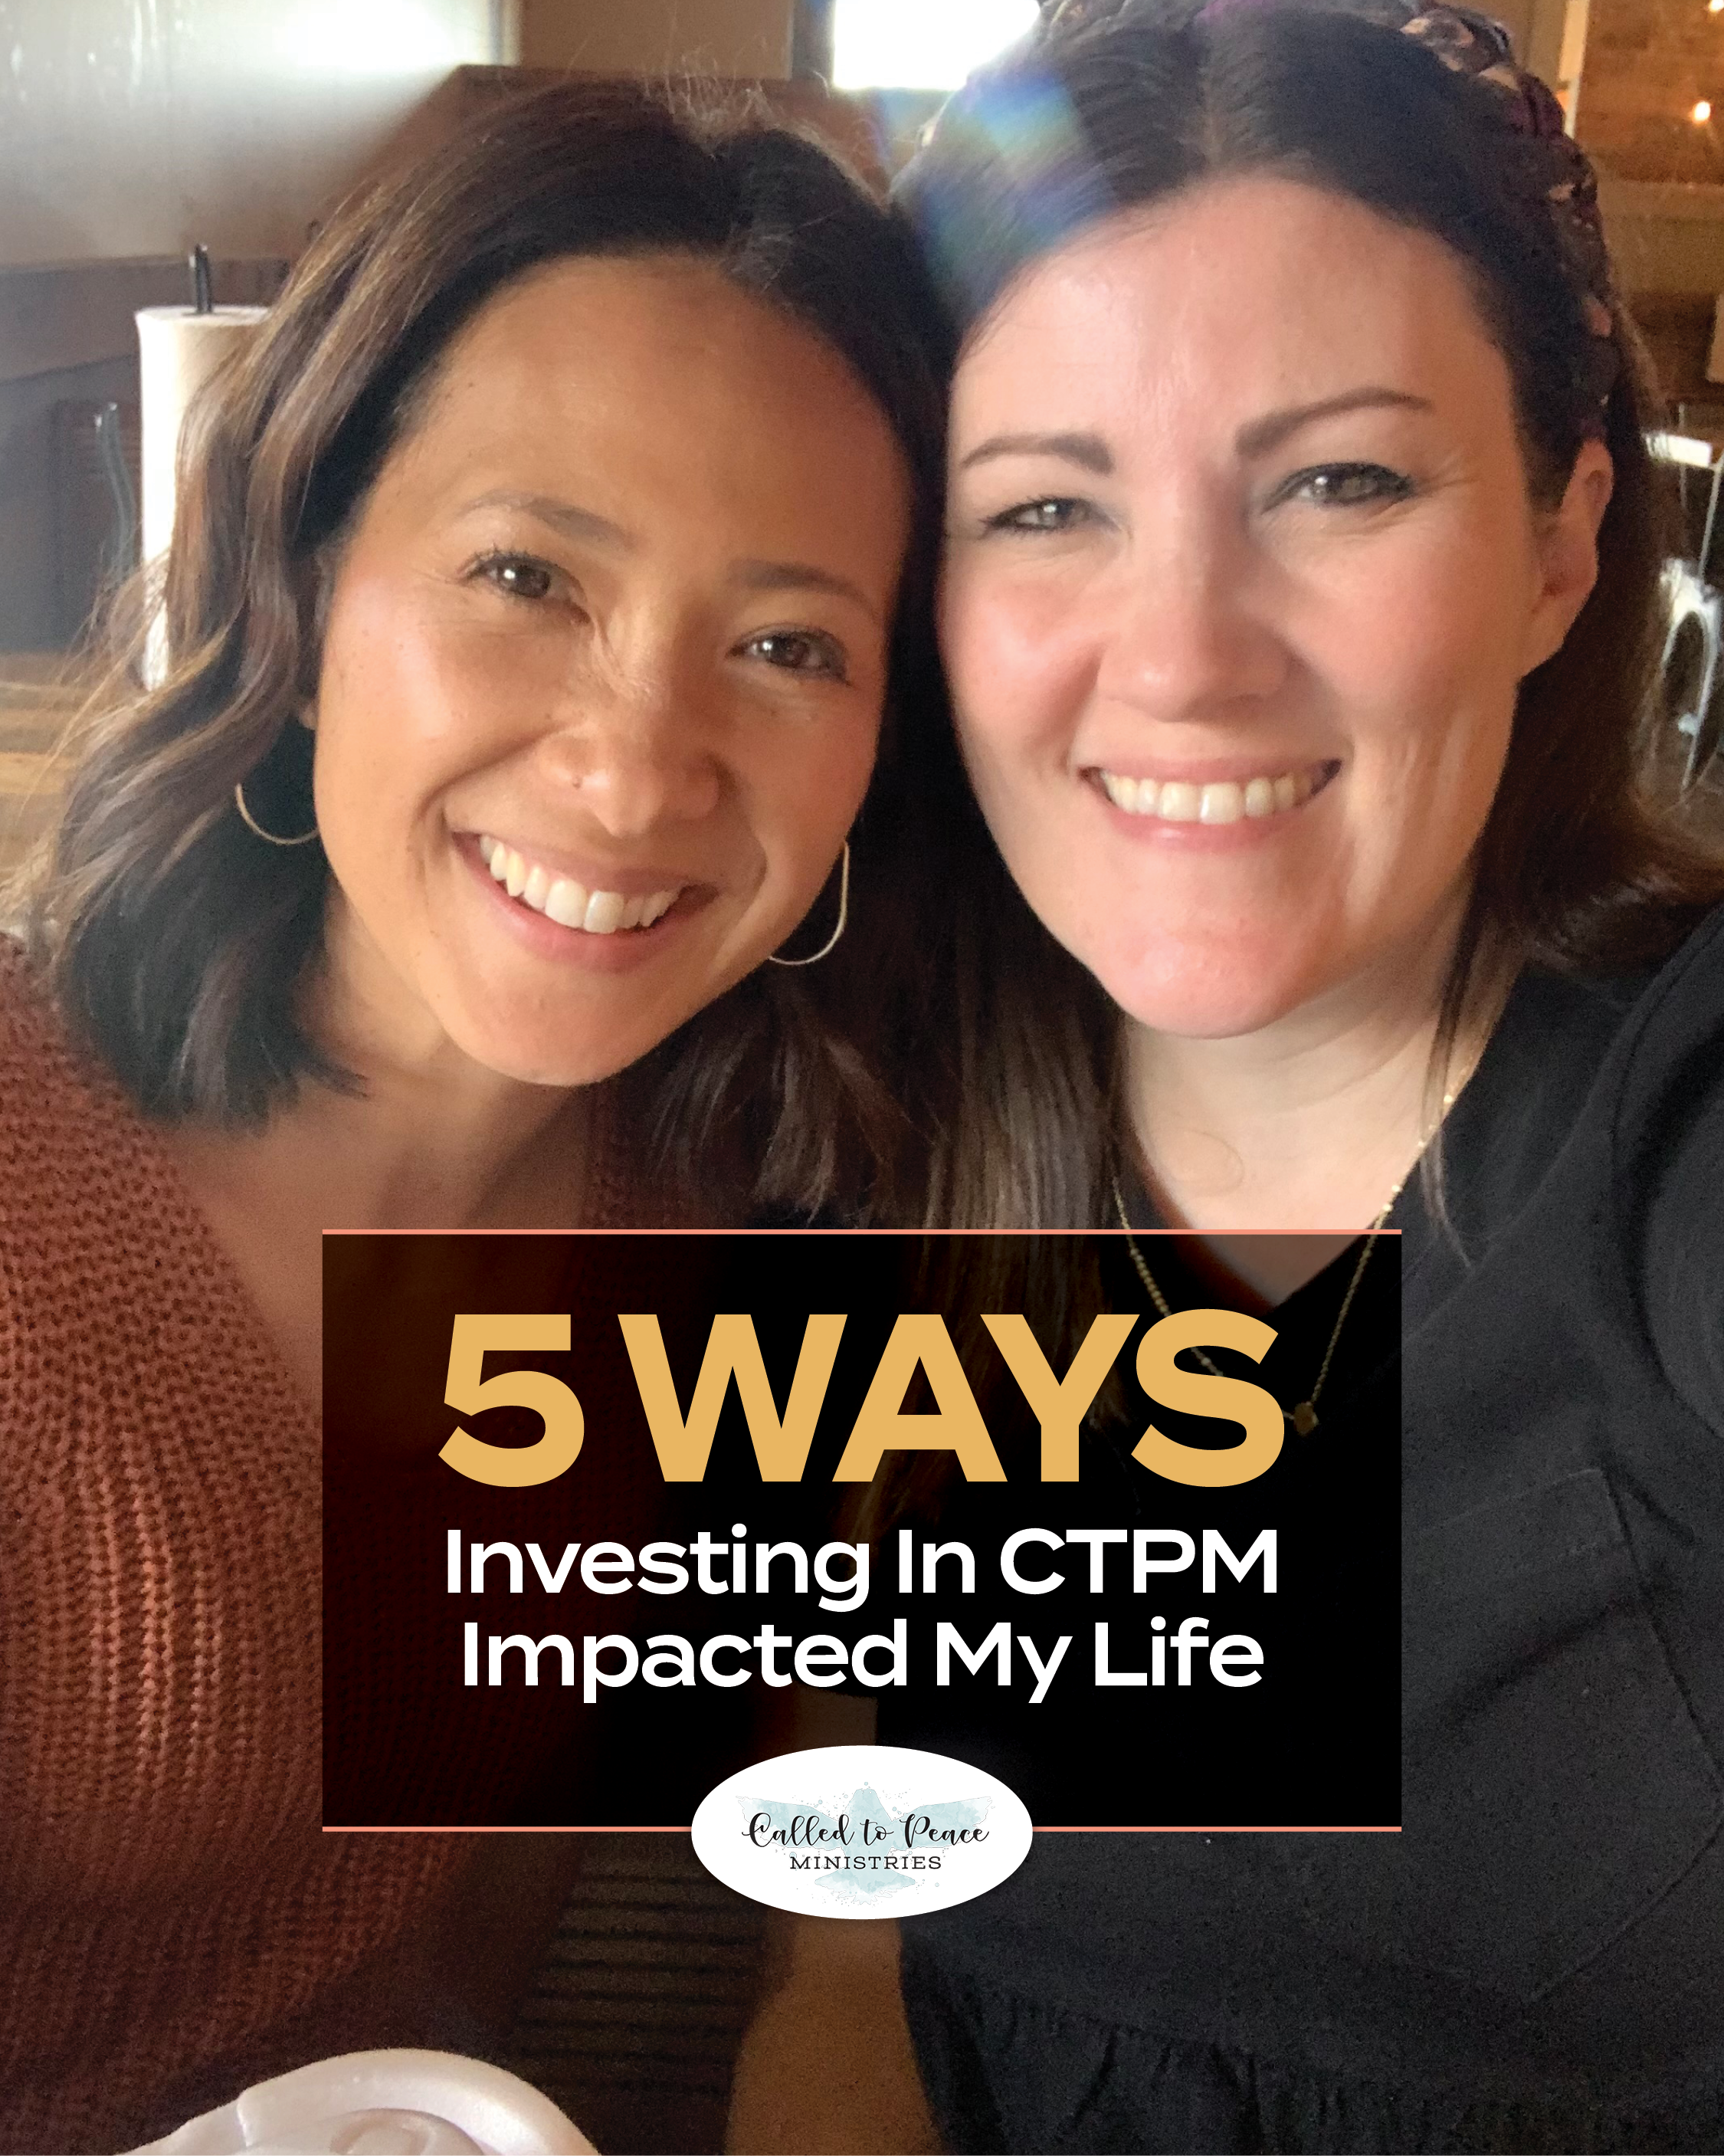 5 Ways Investing in CTPM Has Impacted My Life